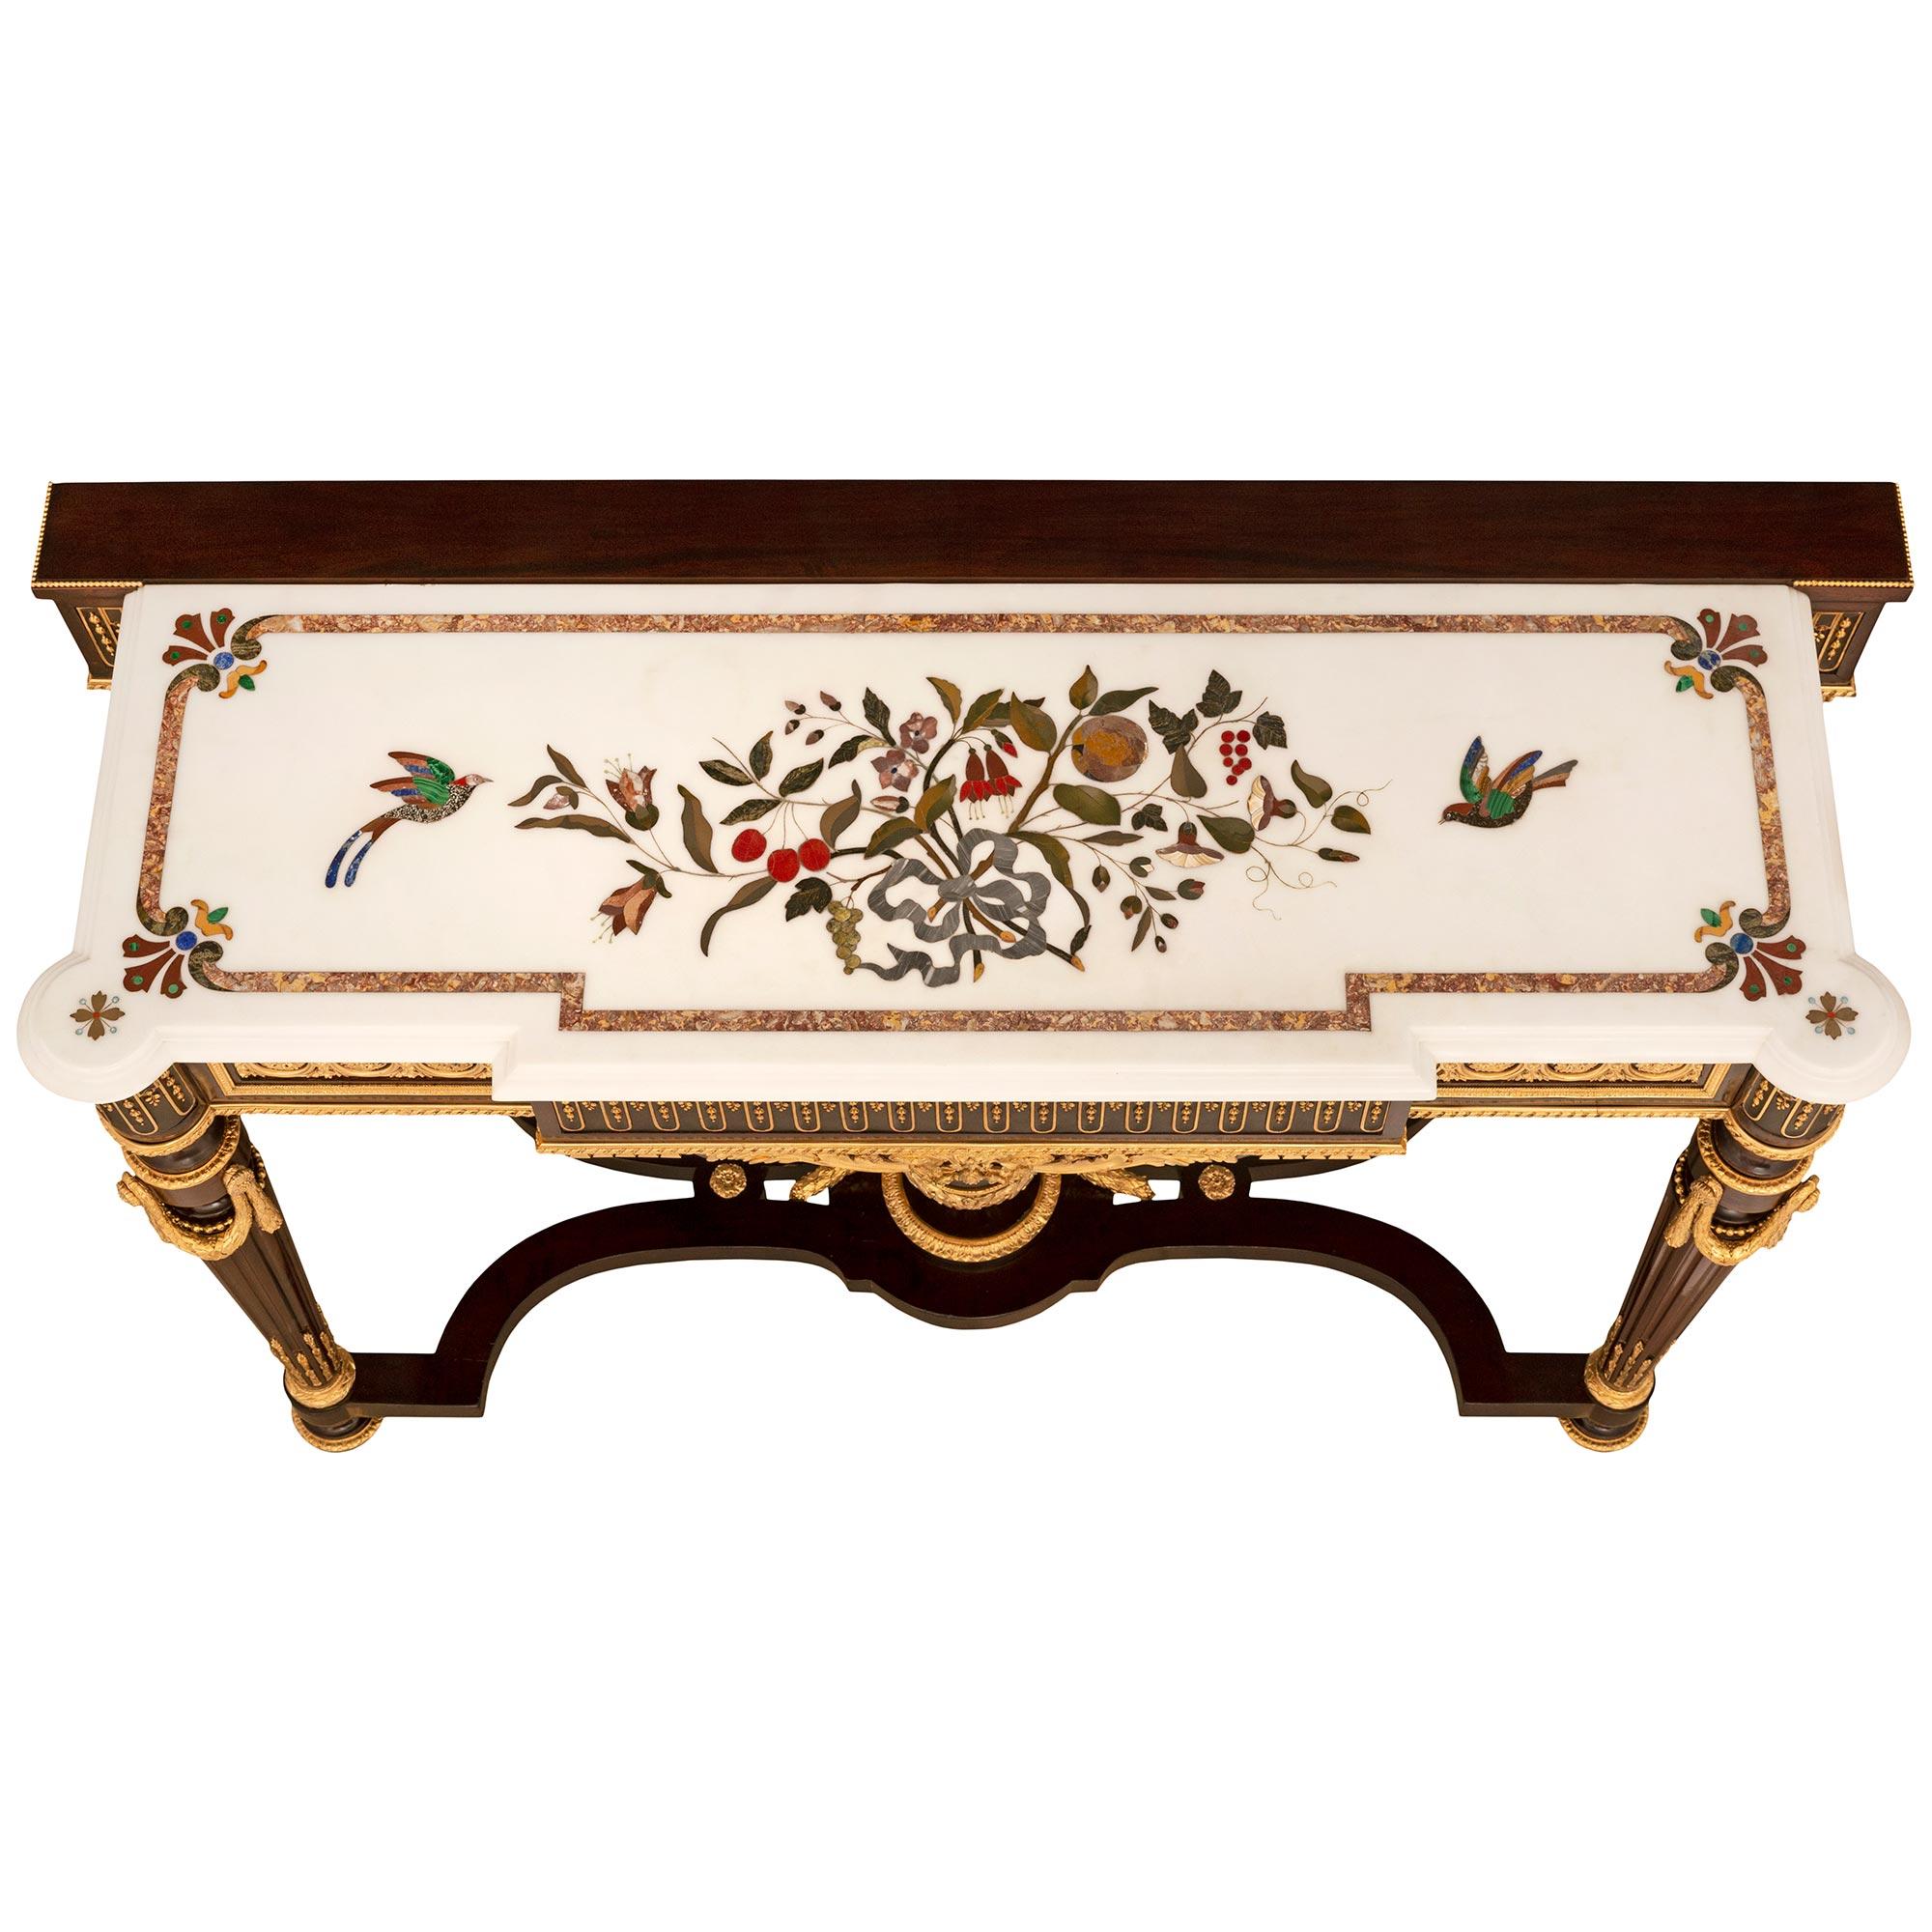 An exceptional and high quality French 19th century Louis XVI st. Napoleon III Period Mahogany, Ormolu and marble console. The freestanding console is raised by four topie shaped feet below richly decorated circular fluted tapered legs with the top